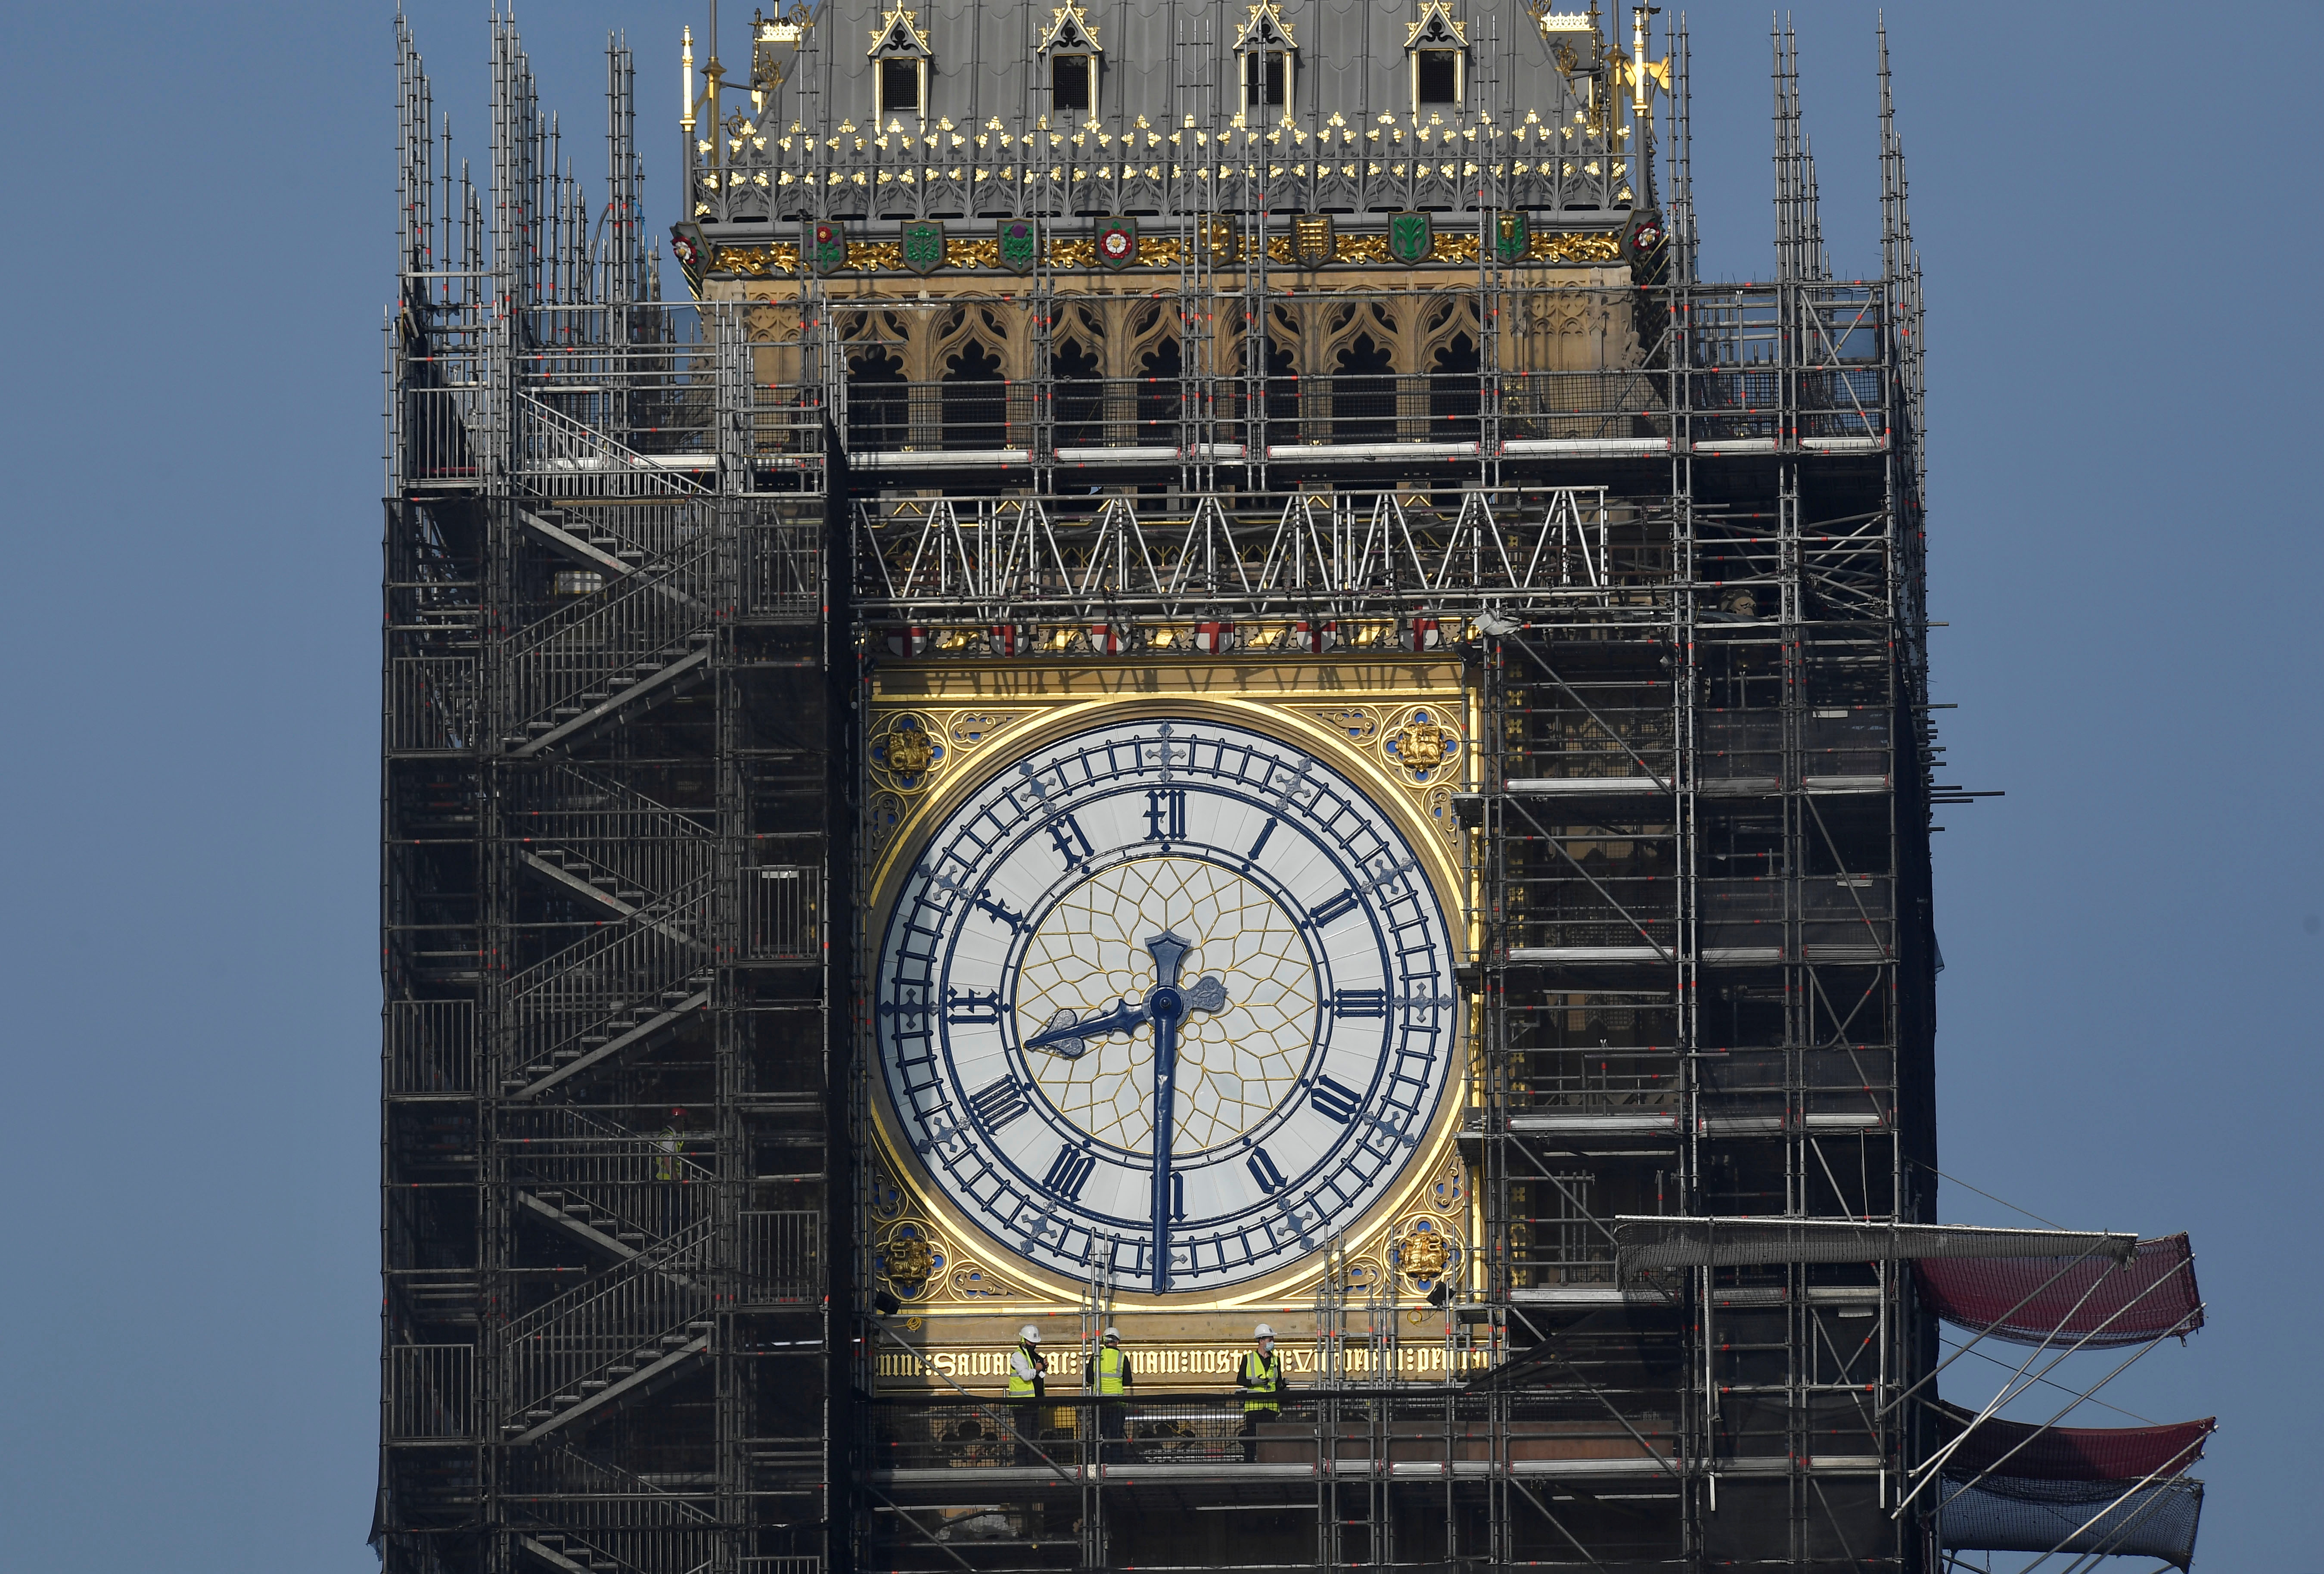 Big Ben clock hands restored to original blue colour as renovations continue at the Houses of Parliament, London